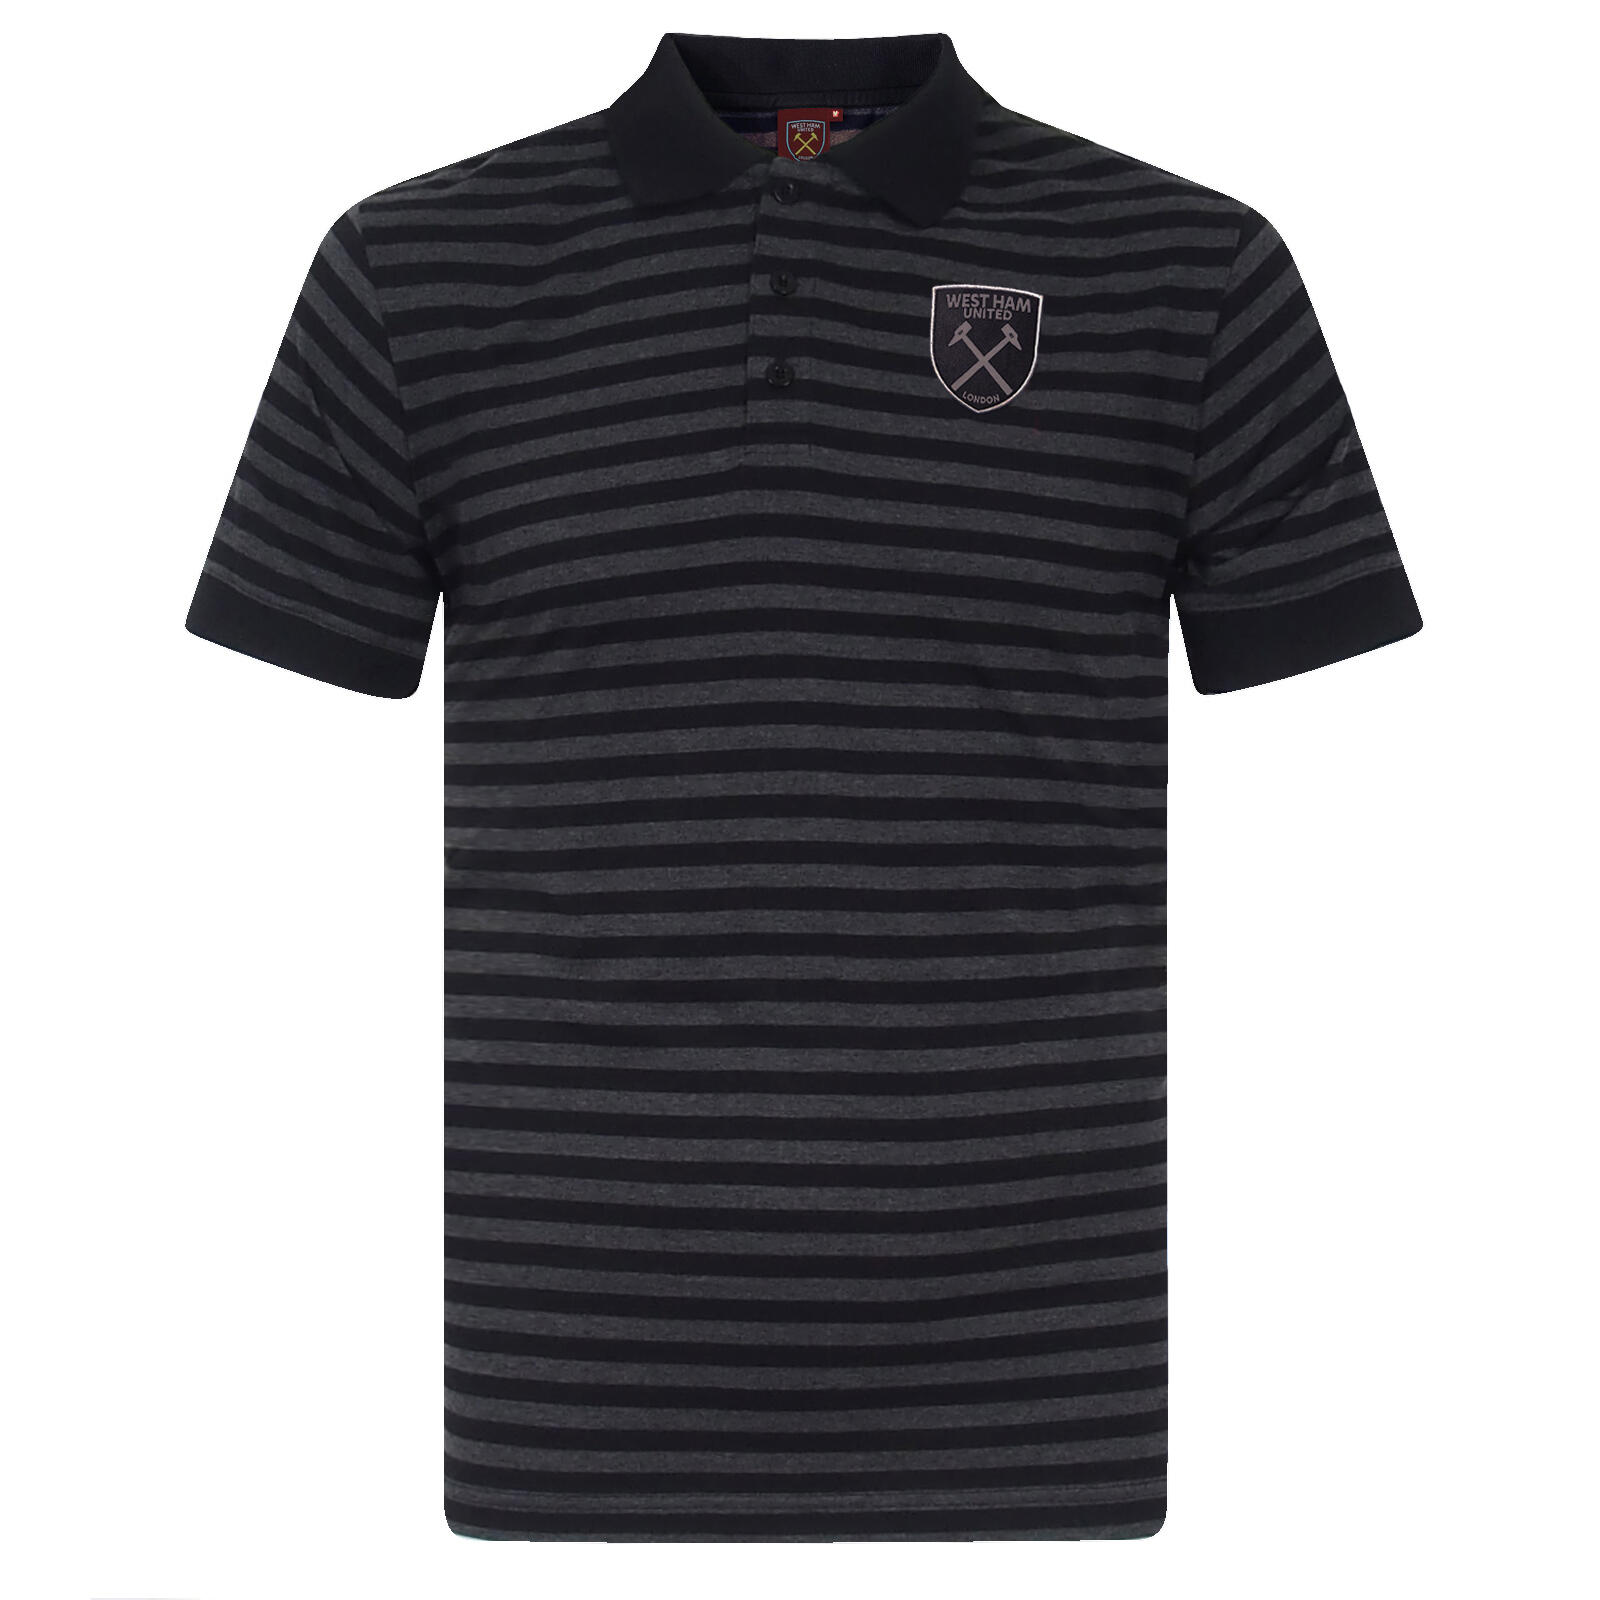 WEST HAM UNITED West Ham United Mens Polo Shirt Striped OFFICIAL Football Gift